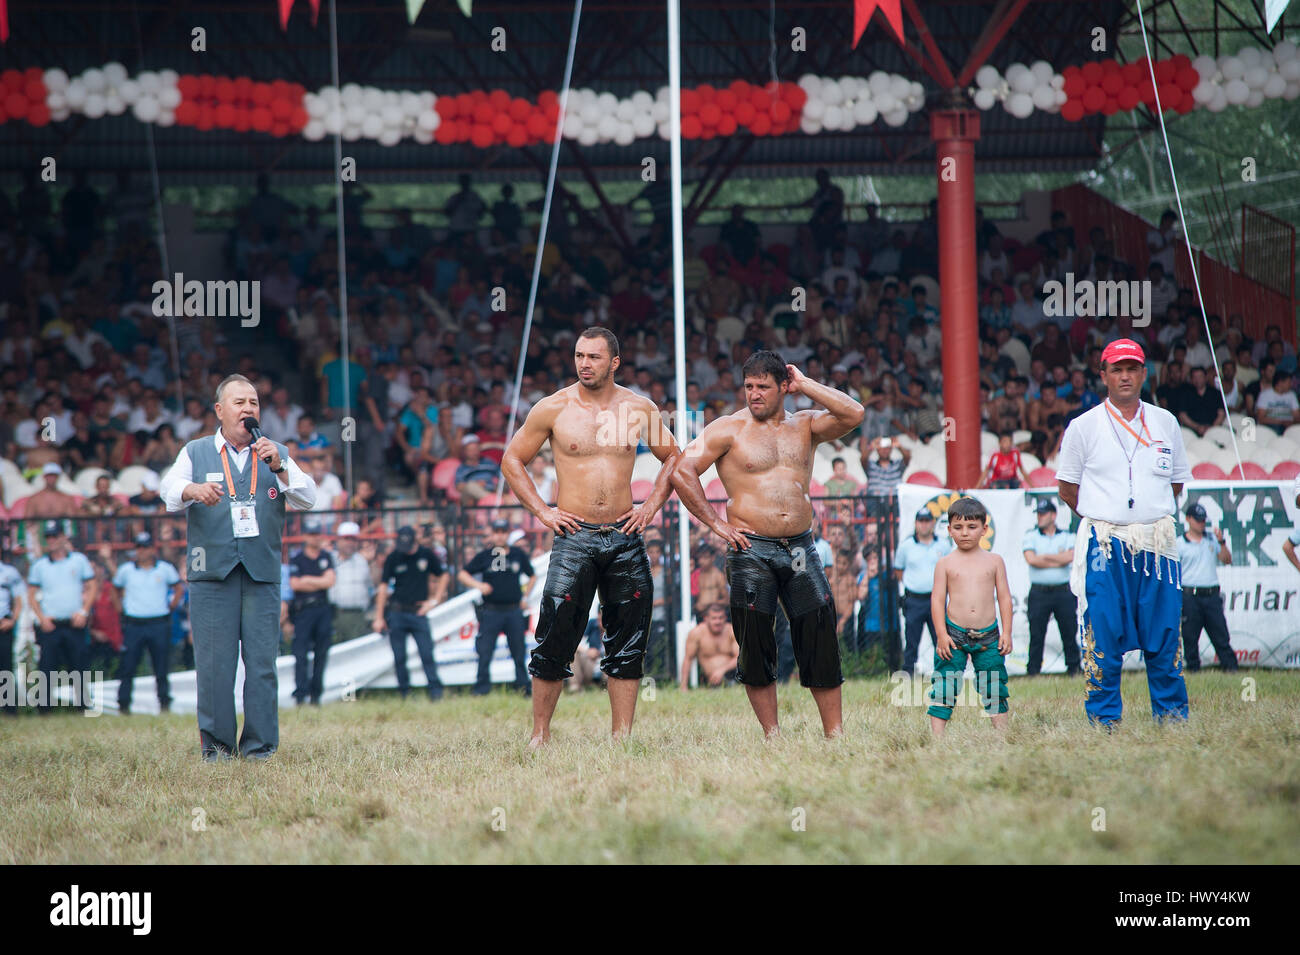 TURKEY, EDIRNE: Historical 'Kirkpinar Oil Wrestling' is the world's oldest sporting event after the Olympics, which has been continuing since the firs Stock Photo